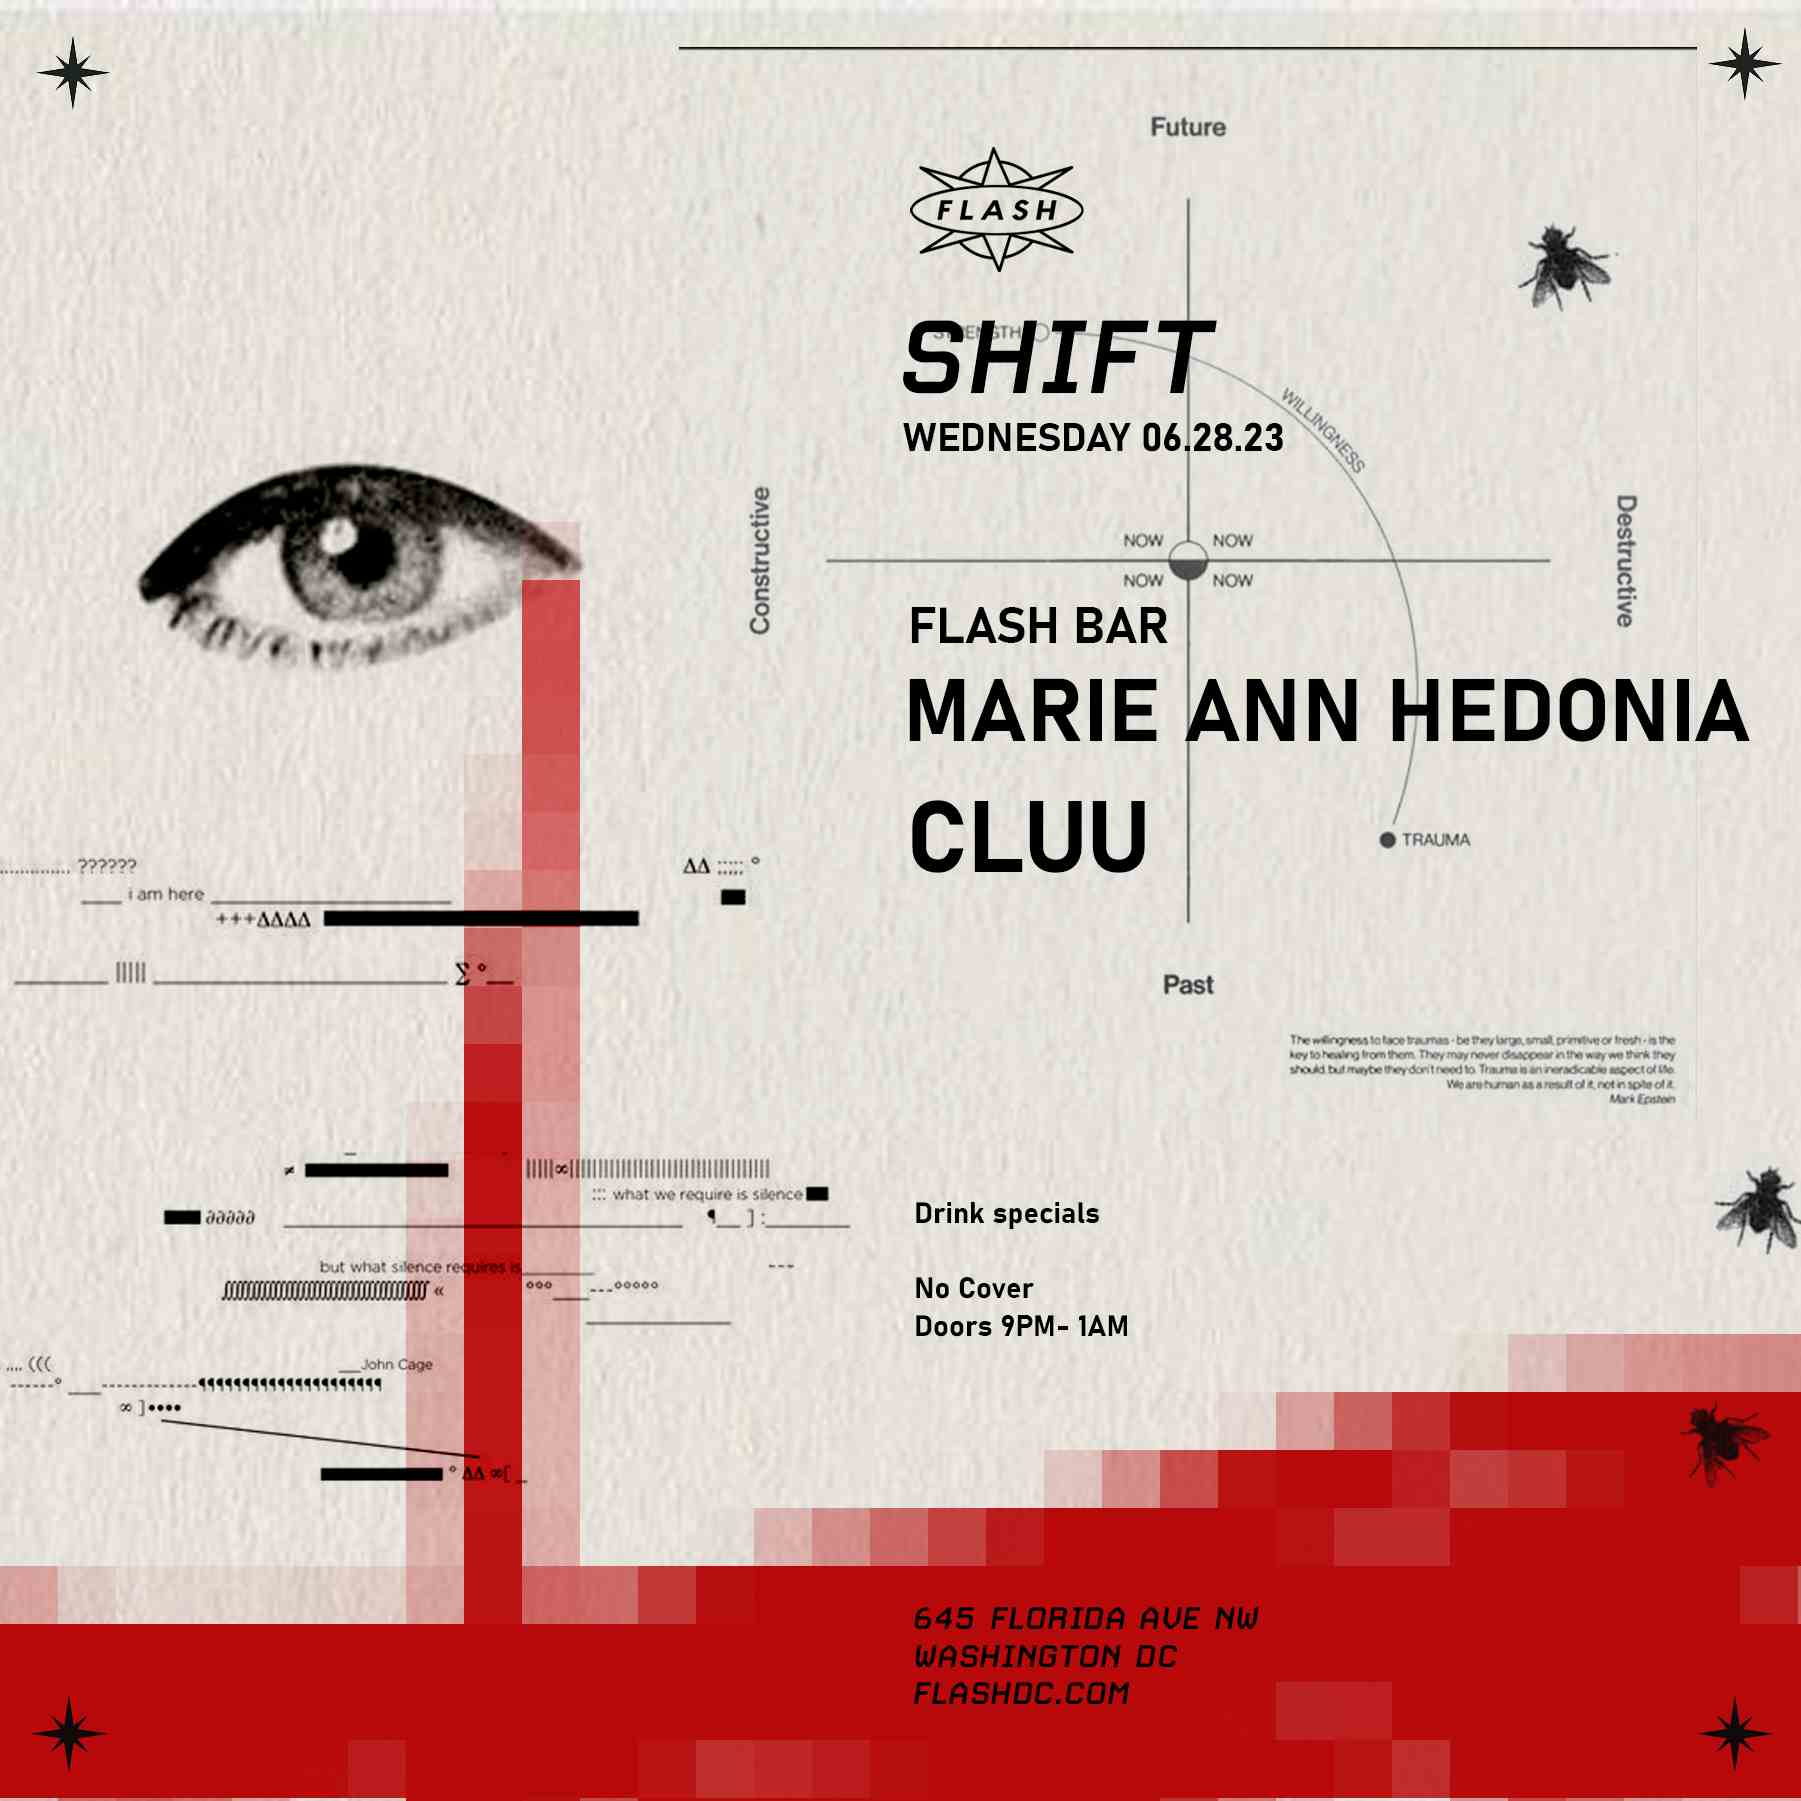 Event image for SHIFT: Marie Ann Hedonia [LiVE Modular Performance] - Cluu